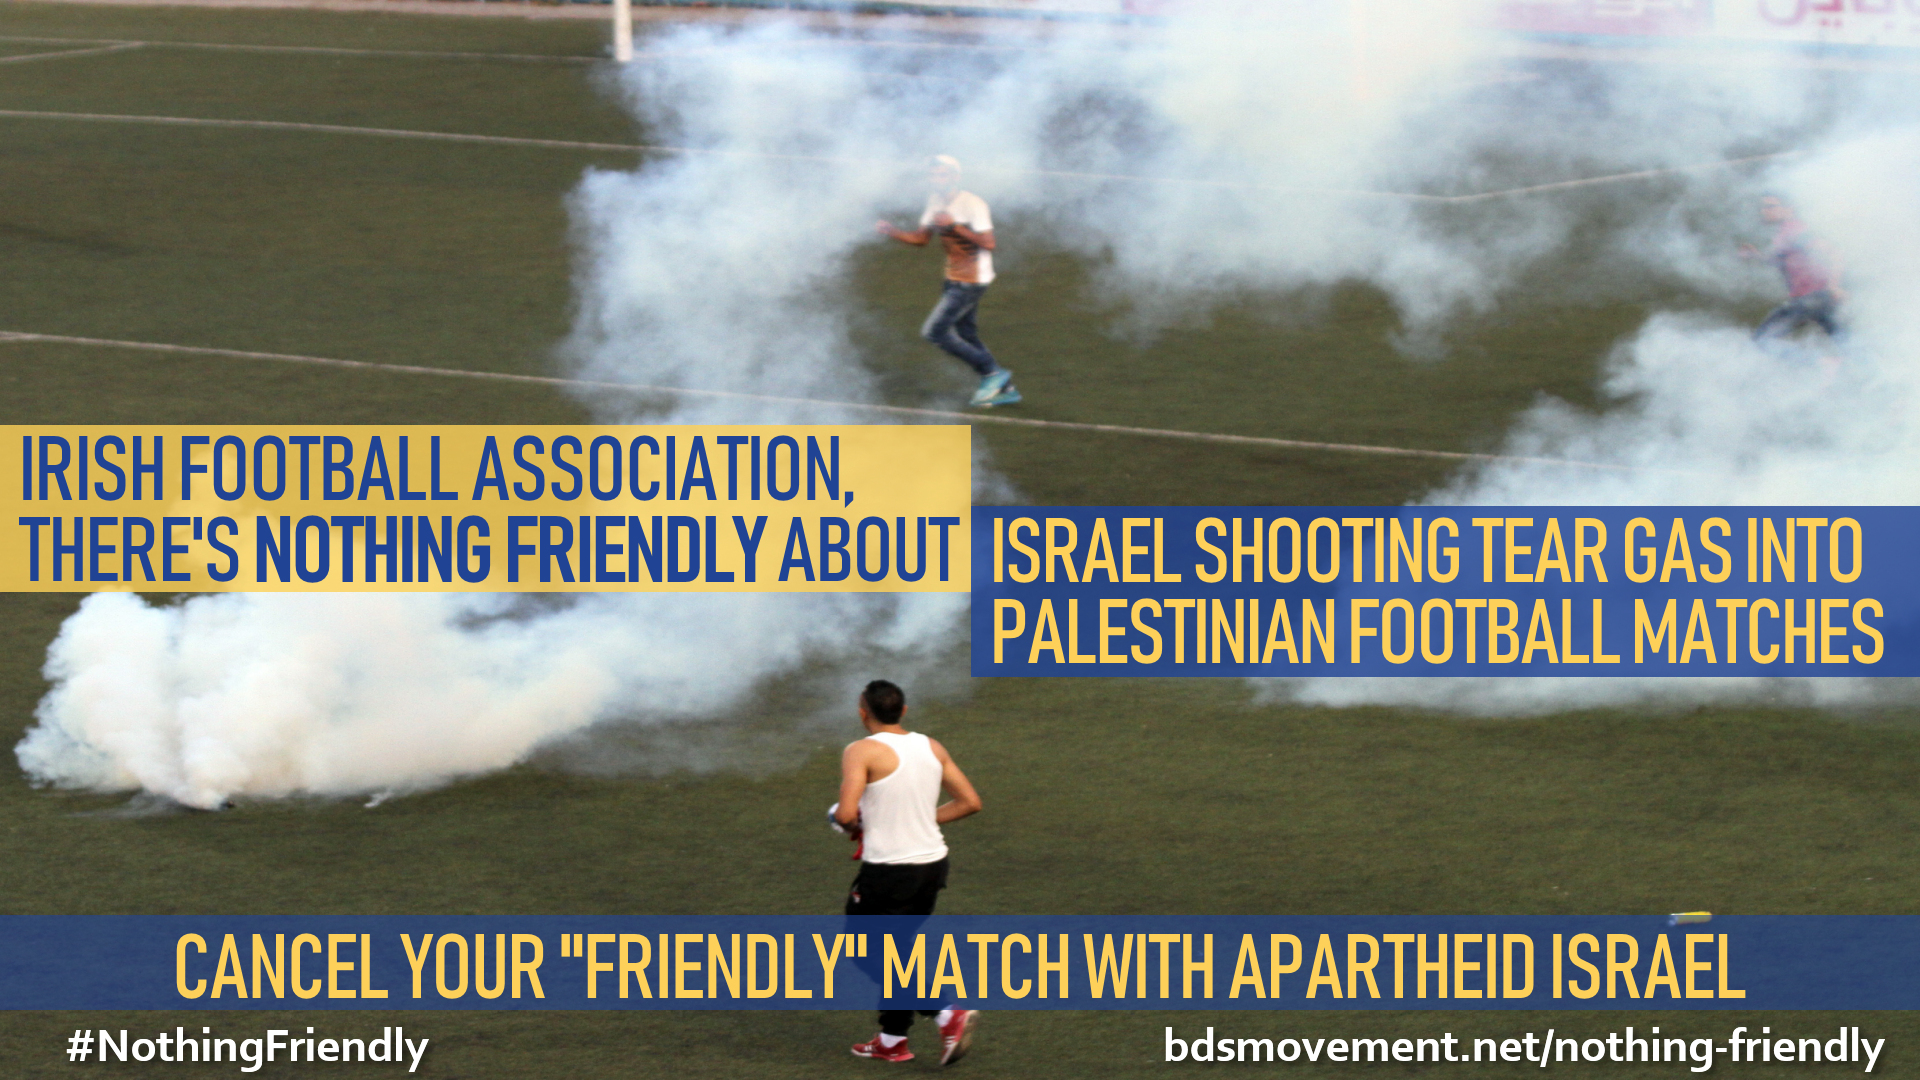 Irish Football Assoc, there's nothing friendly about shooting teargas into Palestinian football matches